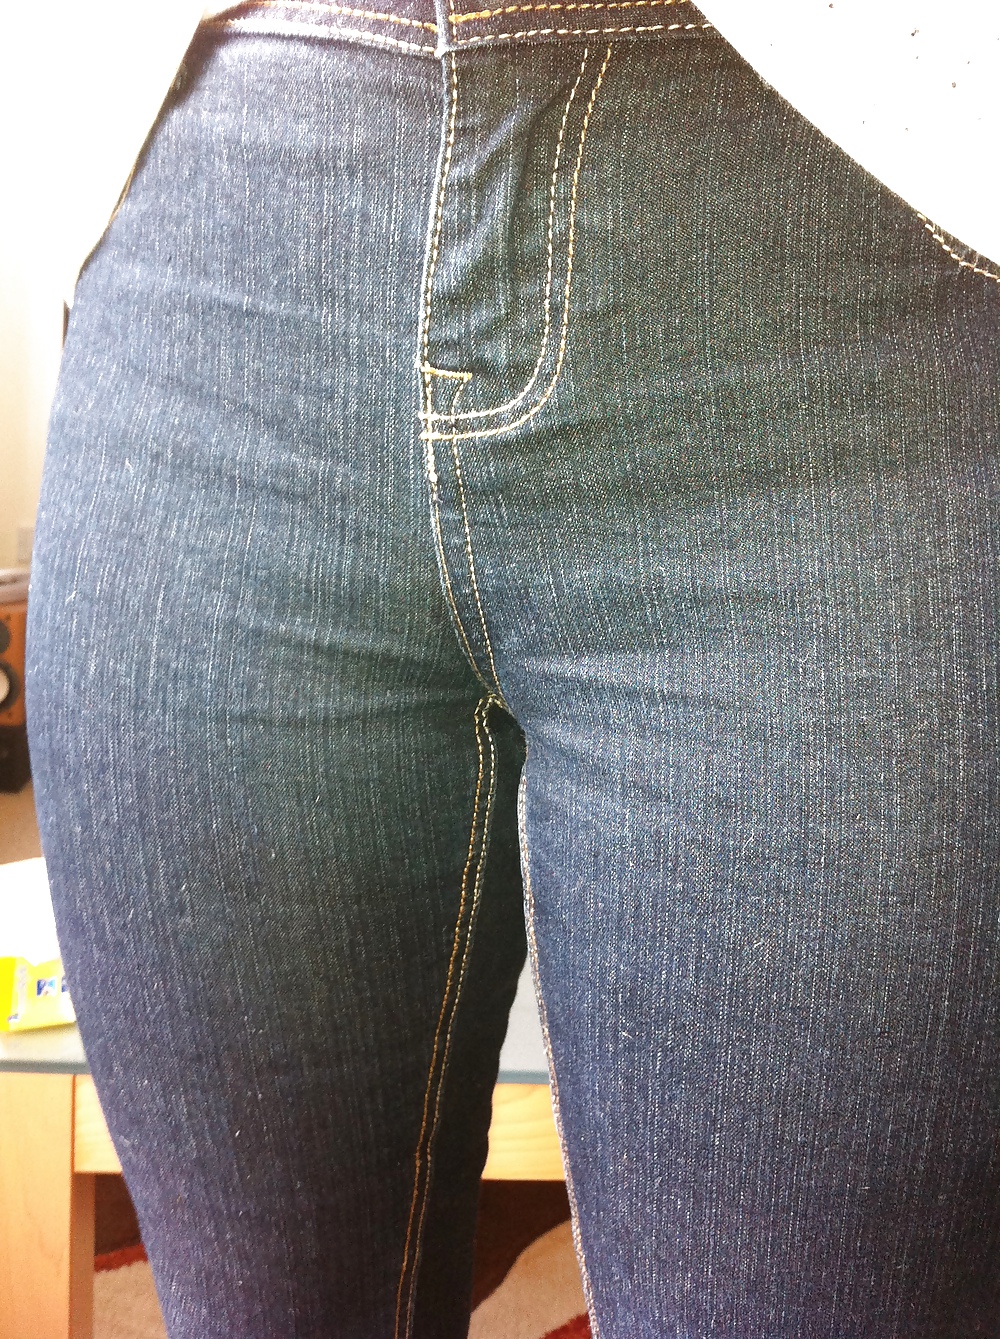 my gorgeous gf looking dam fine in her new jeans pict gal